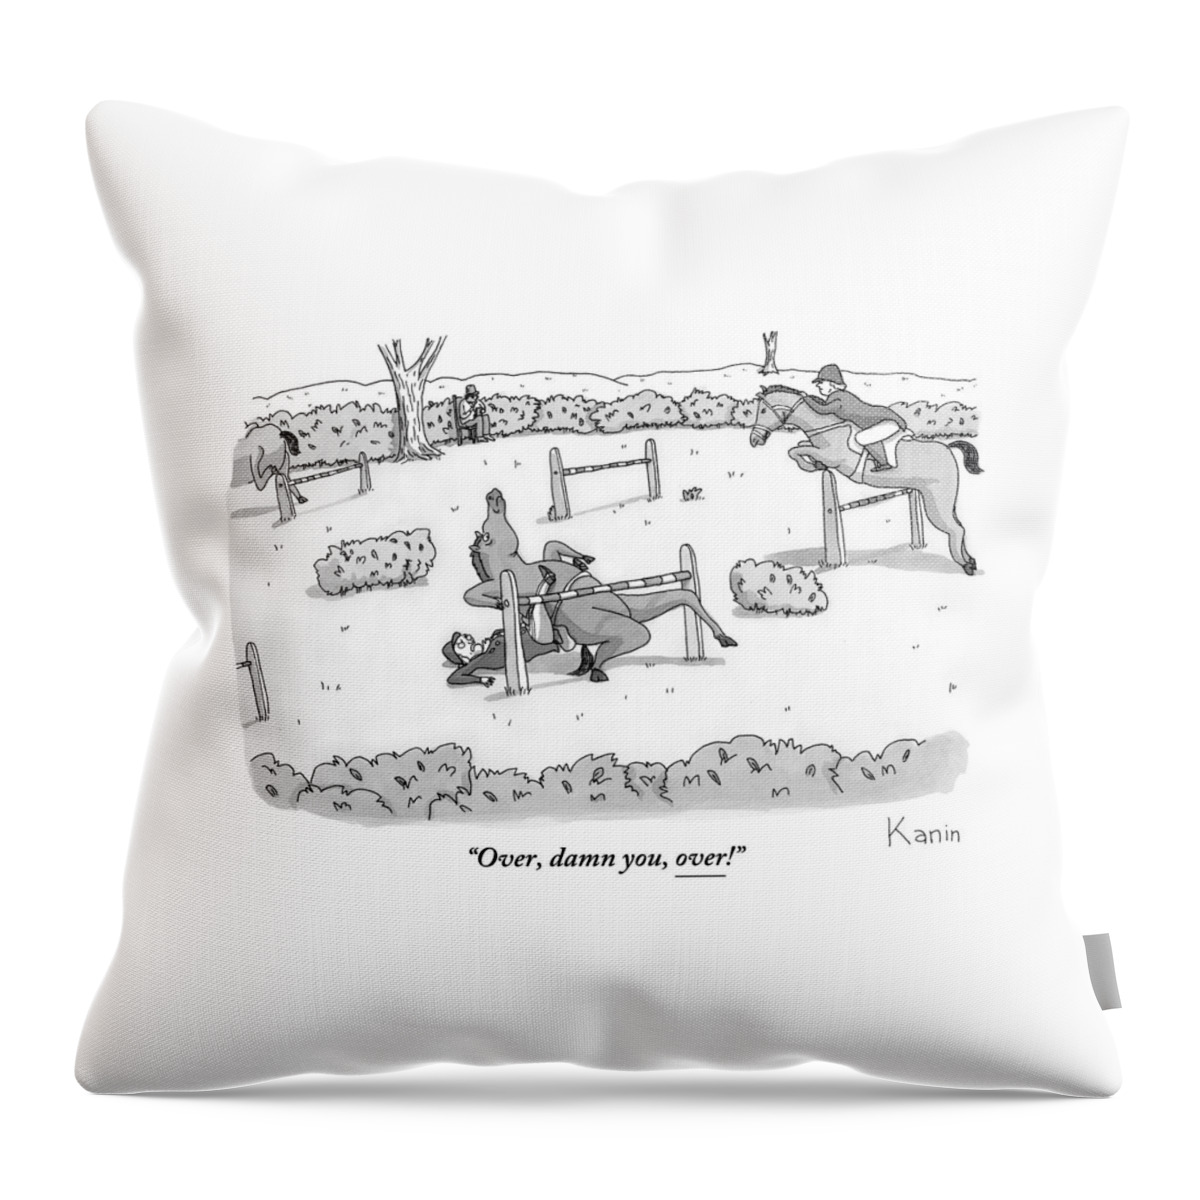 A Man Is Riding A Horse In A Competition. Throw Pillow